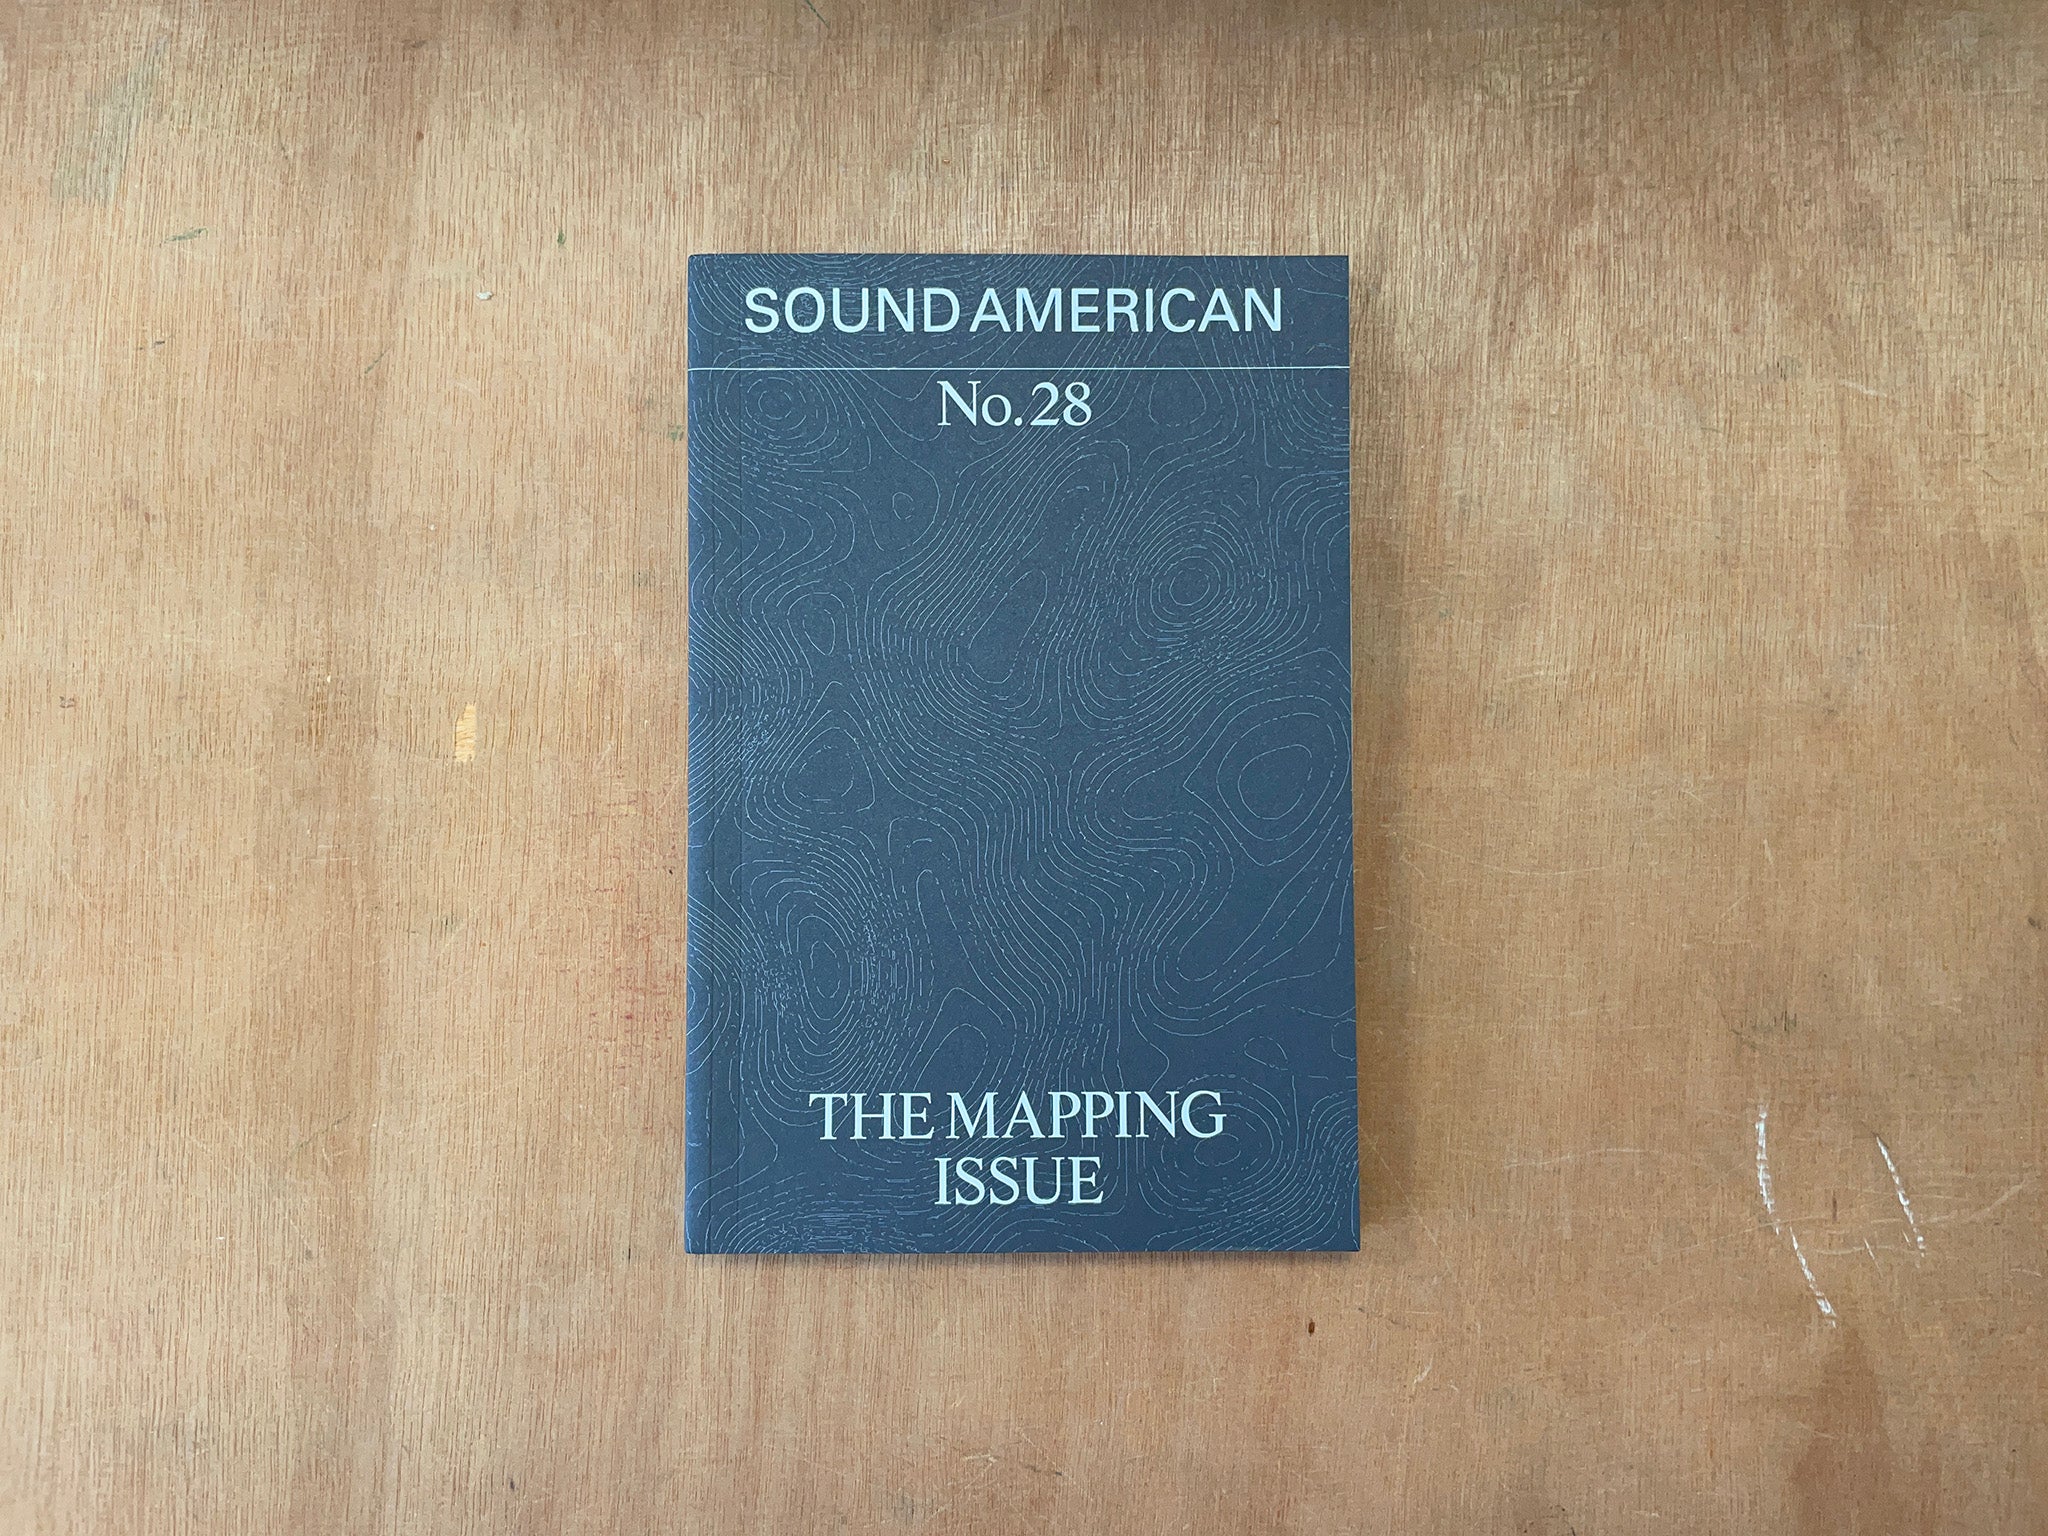 SOUND AMERICAN #28 –– THE MAPPING ISSUE